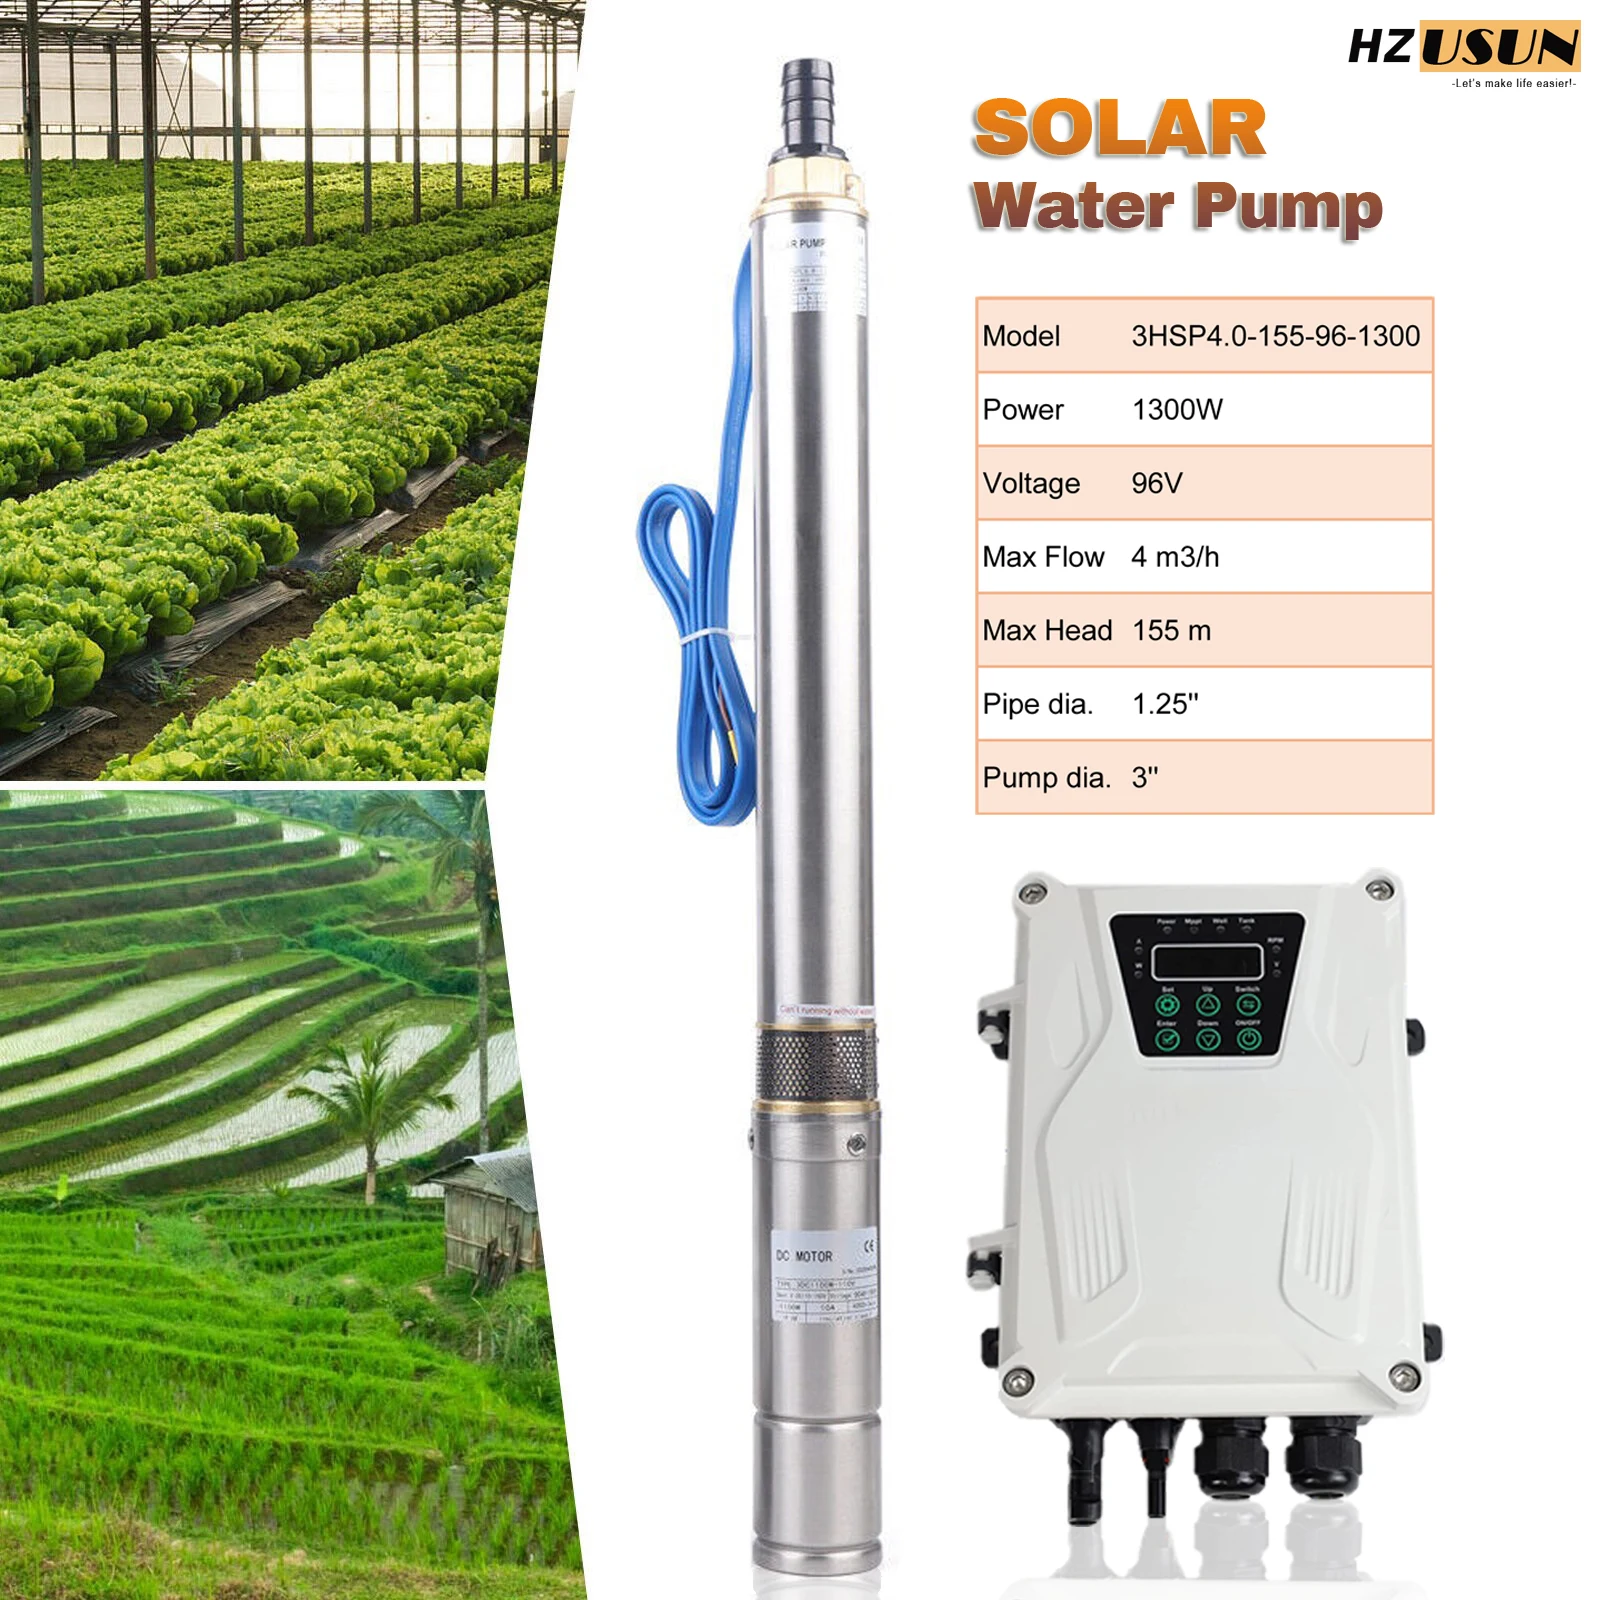 

DC 96V 1300W Solar Submersible Deep Well Pump System for Agriculture Solar Power 100M Borehole Pumping Kits with MPPT Controller